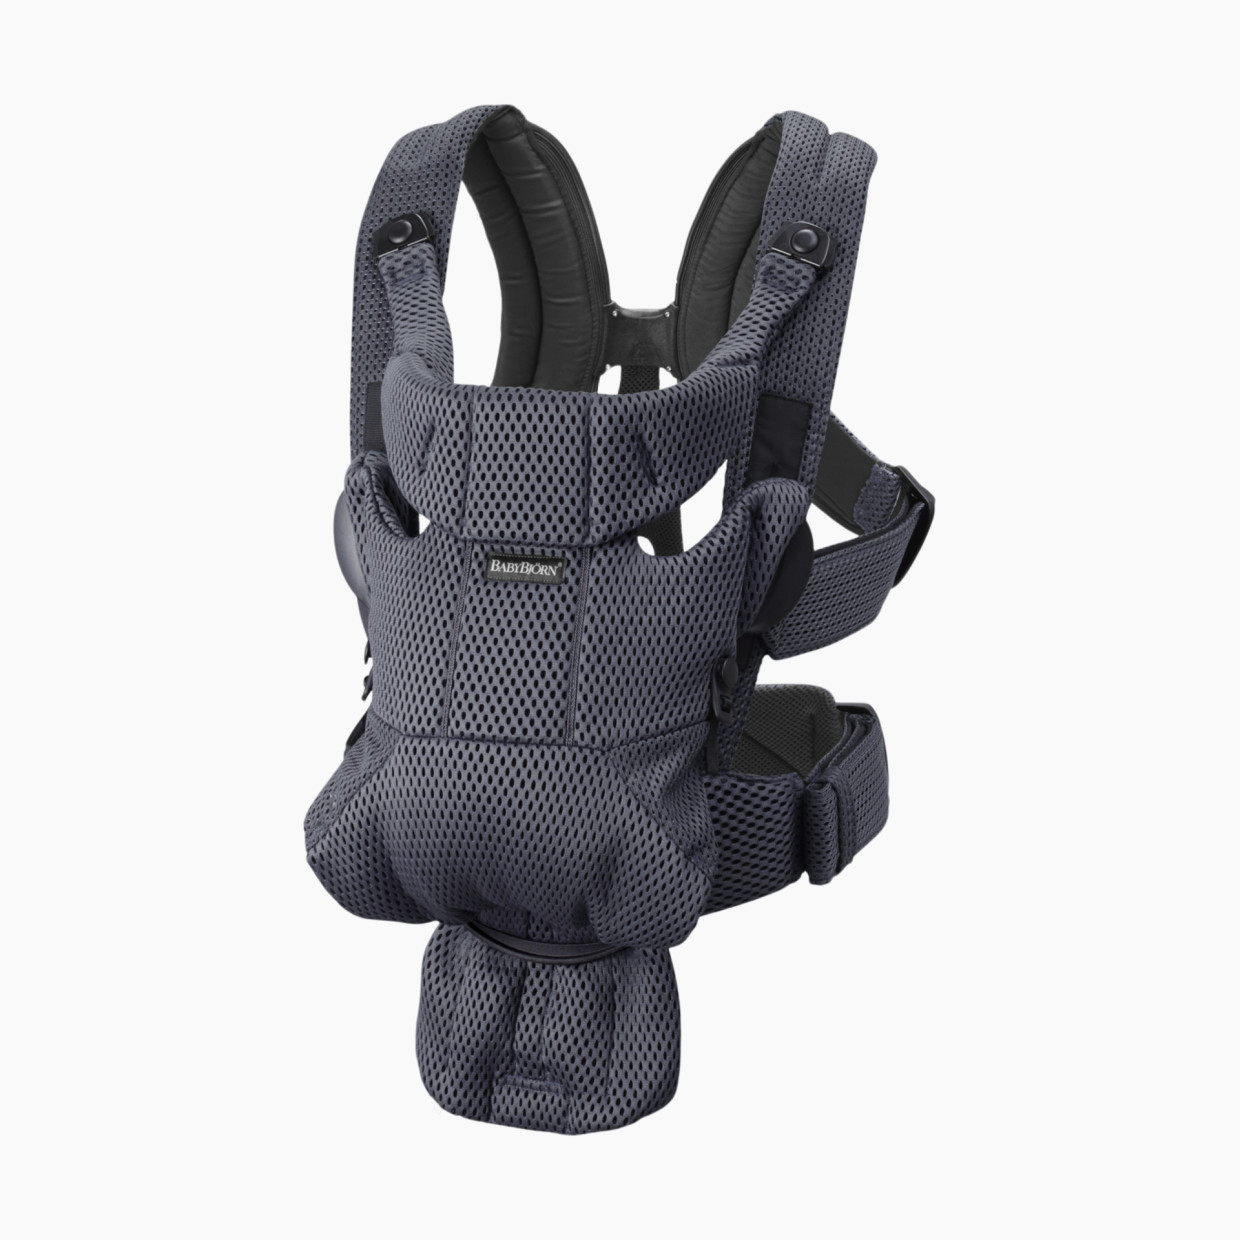 Babybjörn Baby Carrier Free - Anthracite.